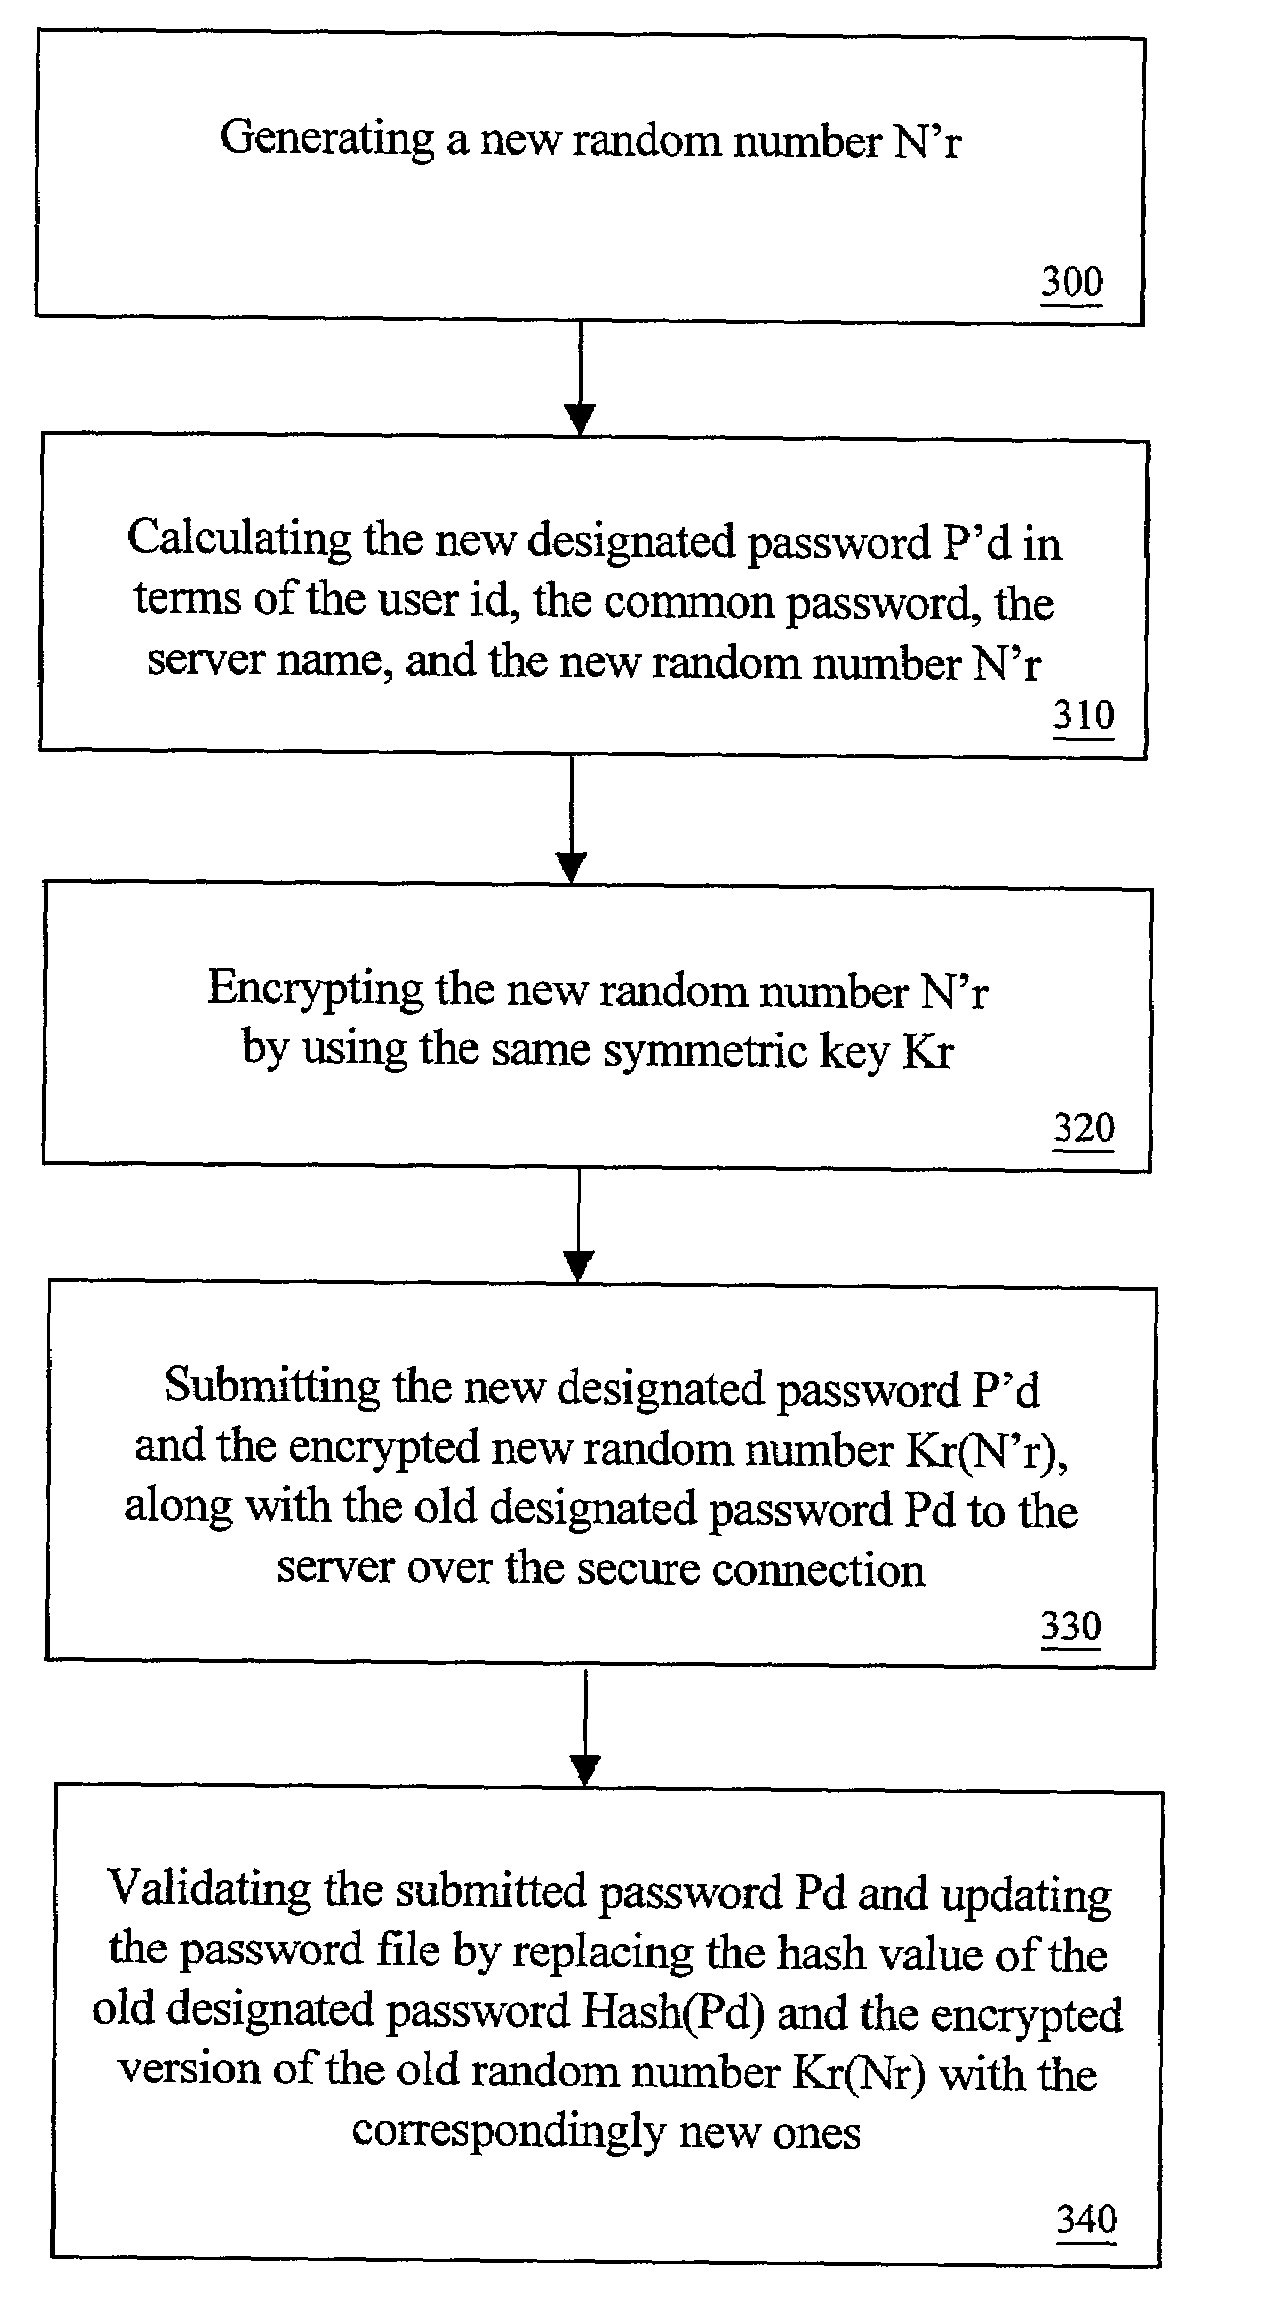 System and method for providing access to multiple user accounts via a common password